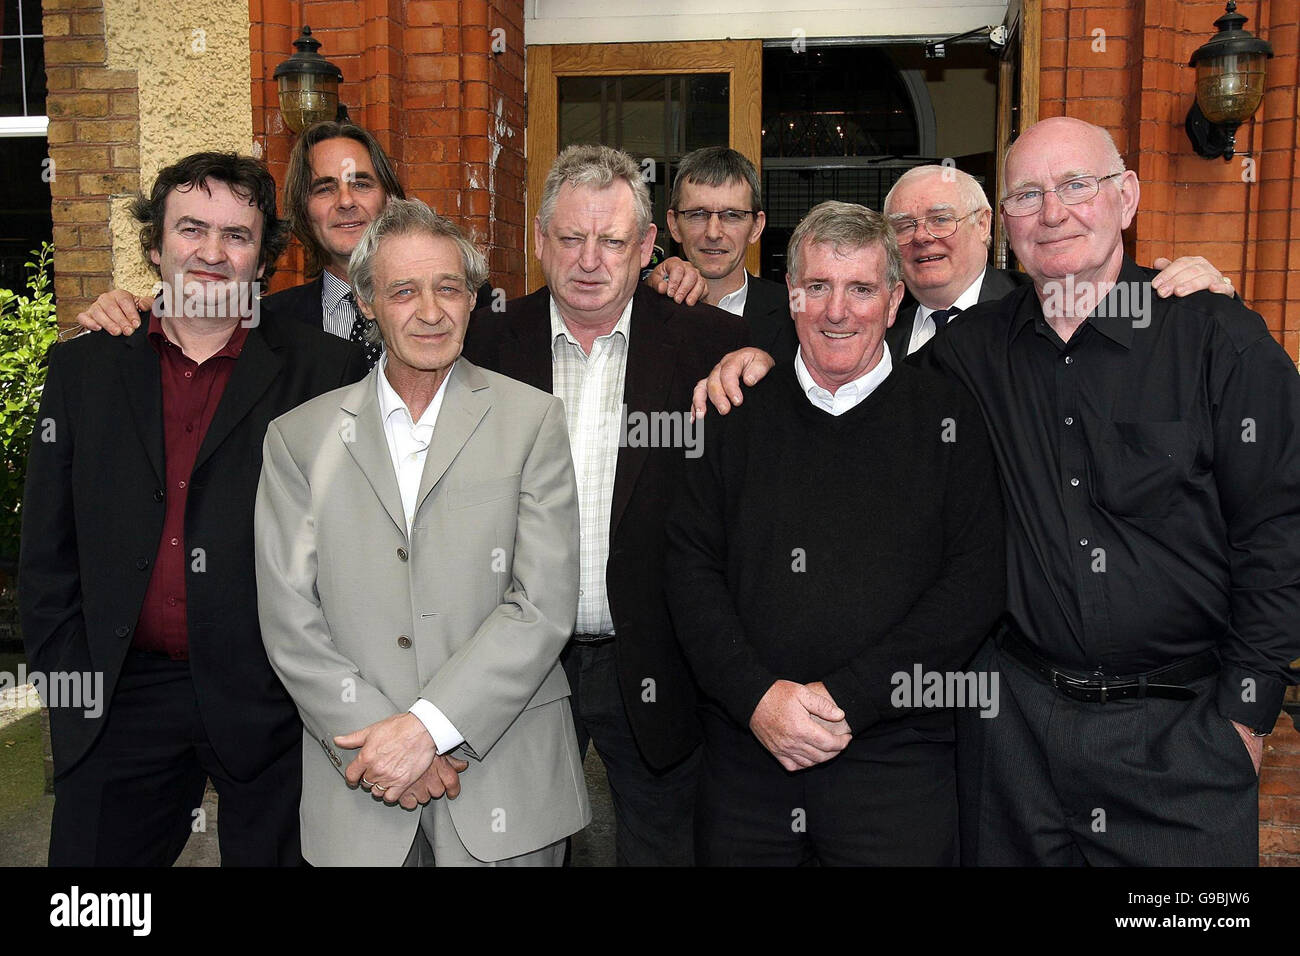 Members of the Birmingham Six and Guildford Four as well as other mourners (from the left) Gerry Conlon, Paul Hill, Paddy Hill, Nicky Kelly, Paddy Mulryan, Gerry Hunter, Billy Power and Johnny Walker gather in the Spa Well hotel after the funeral of Richard McIkenny at St Patrick's Church in Celbridge, Co Kildare, after he died in Dublin aged 73 following a long illness. Stock Photo